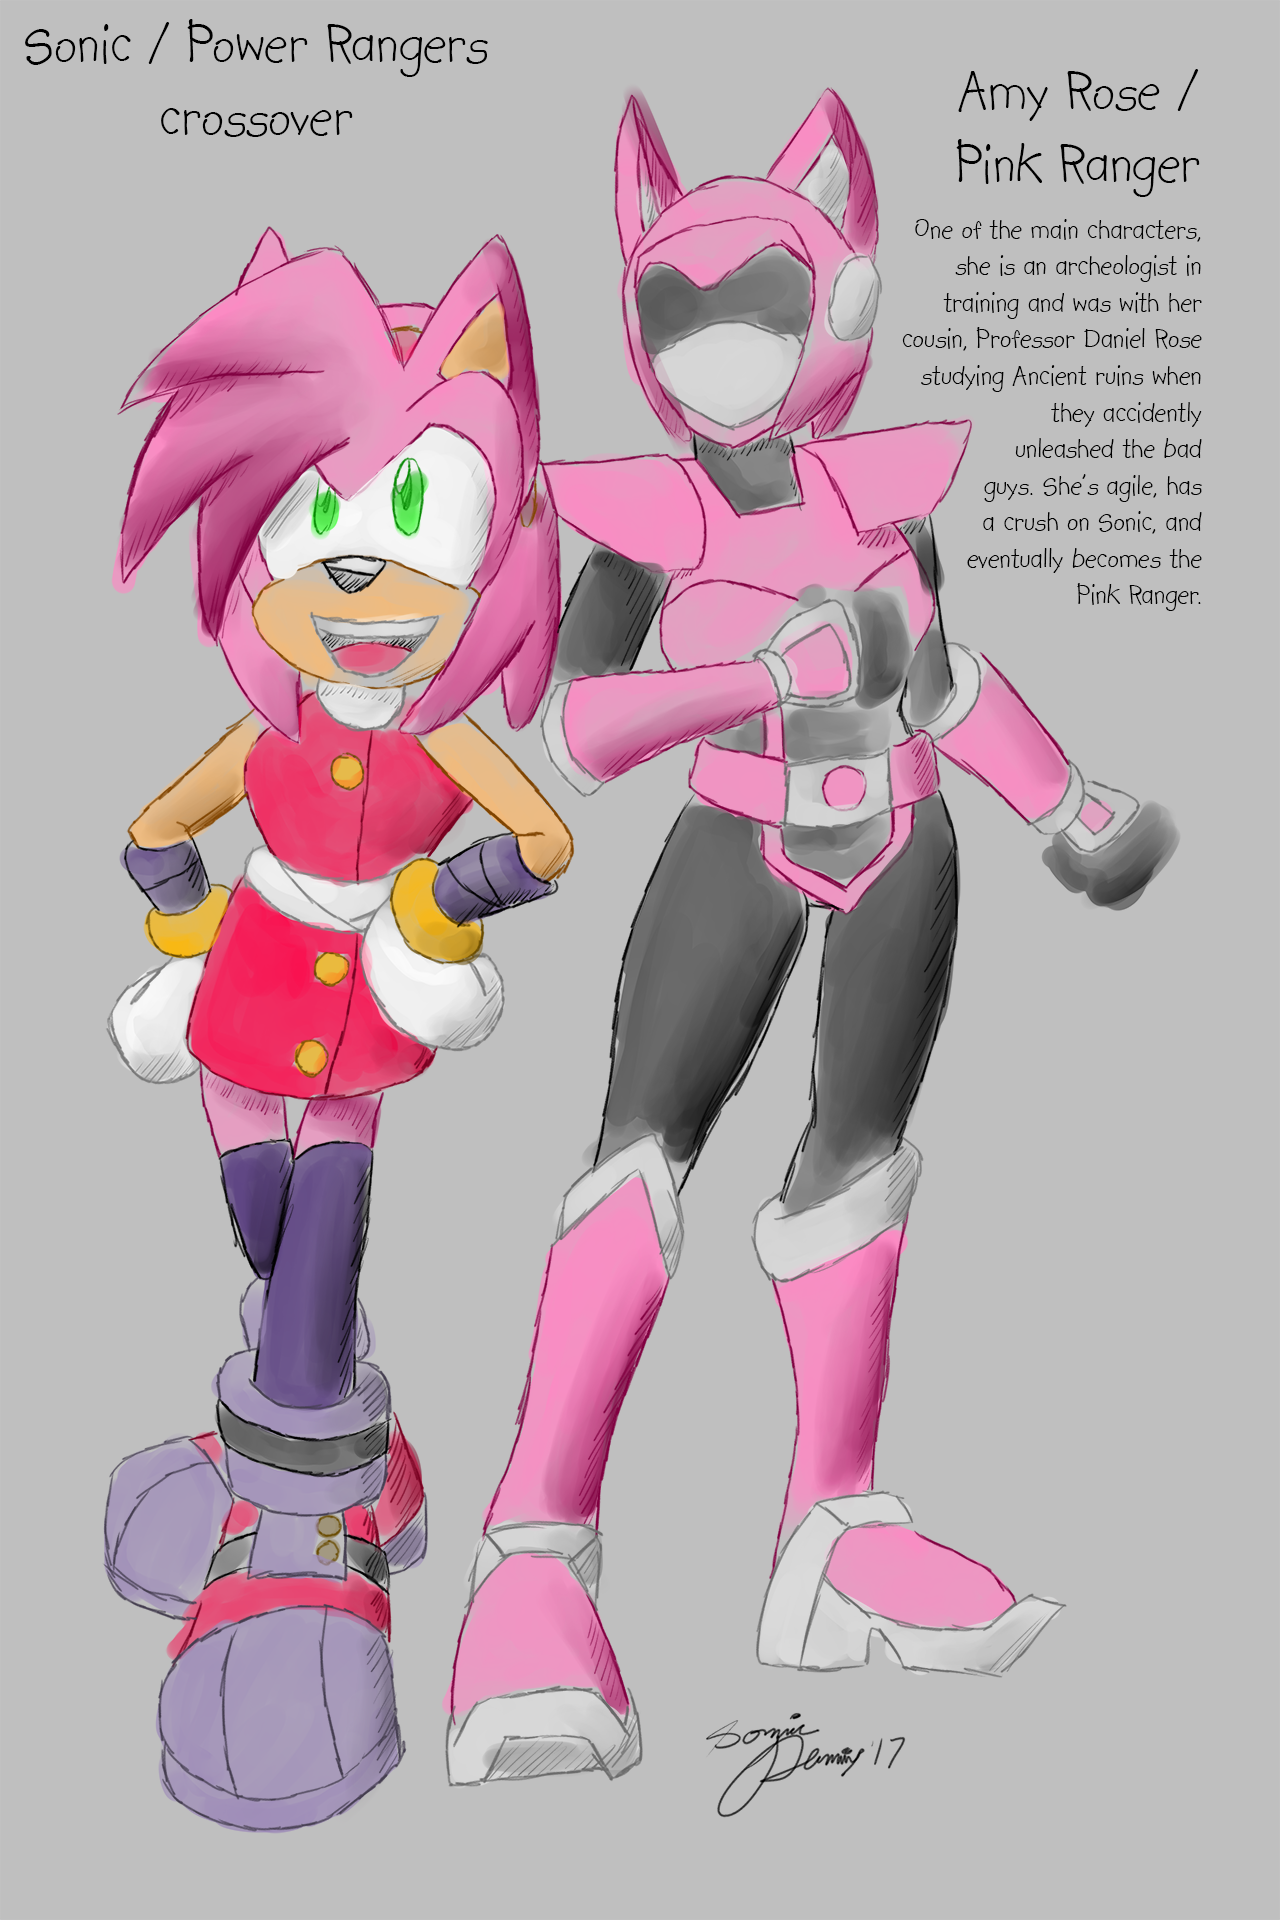 Sonic x Power Rangers - Amy Rose/Pink Ranger by sonicremix